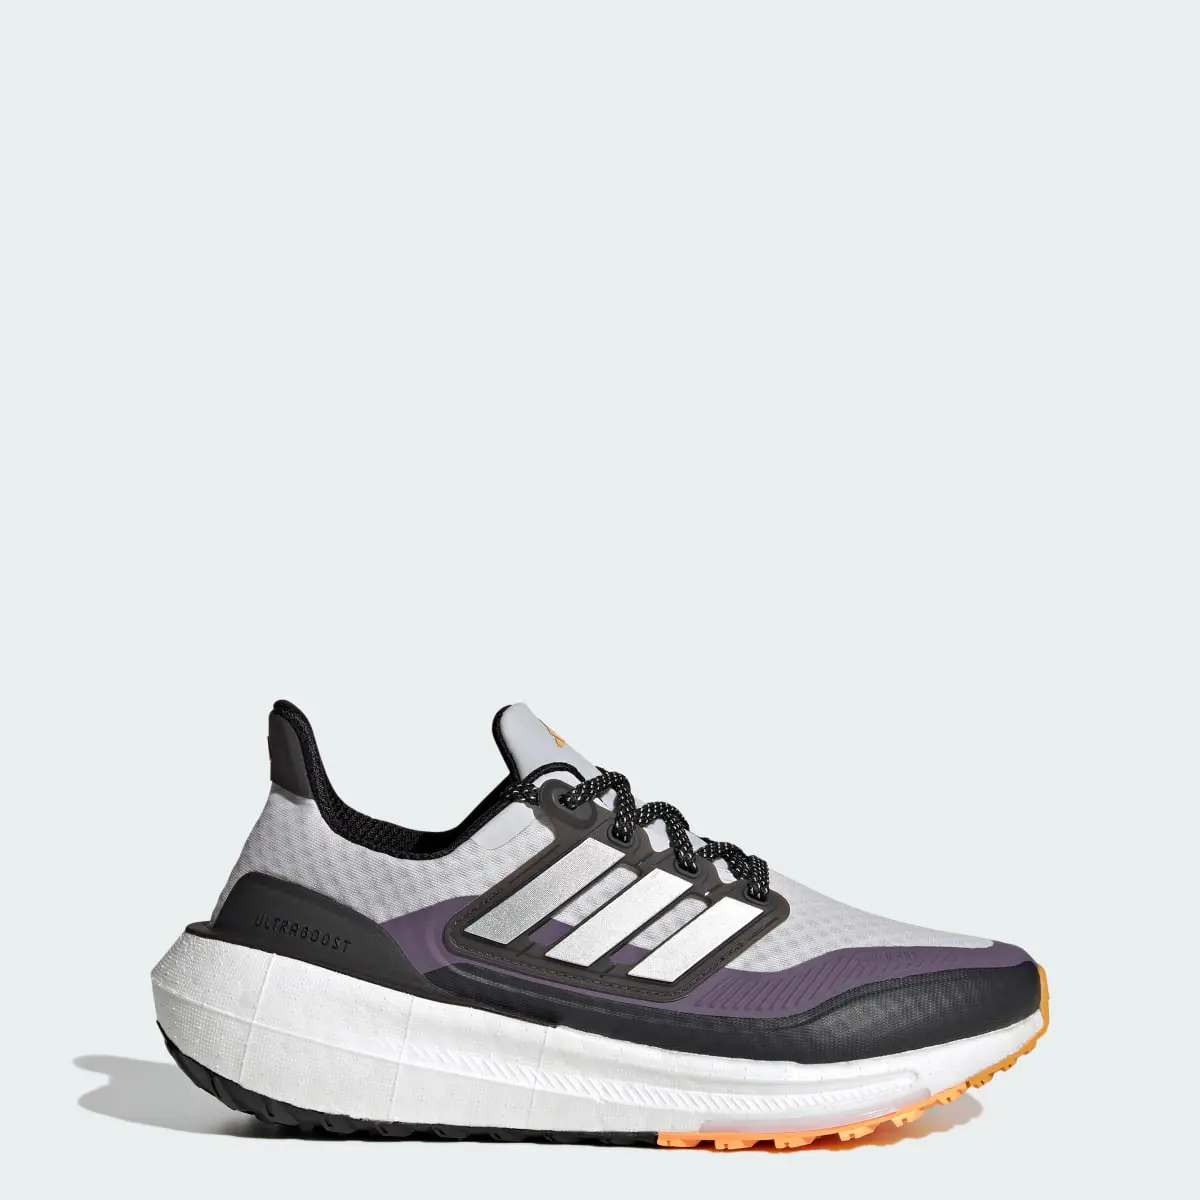 Adidas Ultraboost Light COLD.RDY 2.0 Shoes. 1